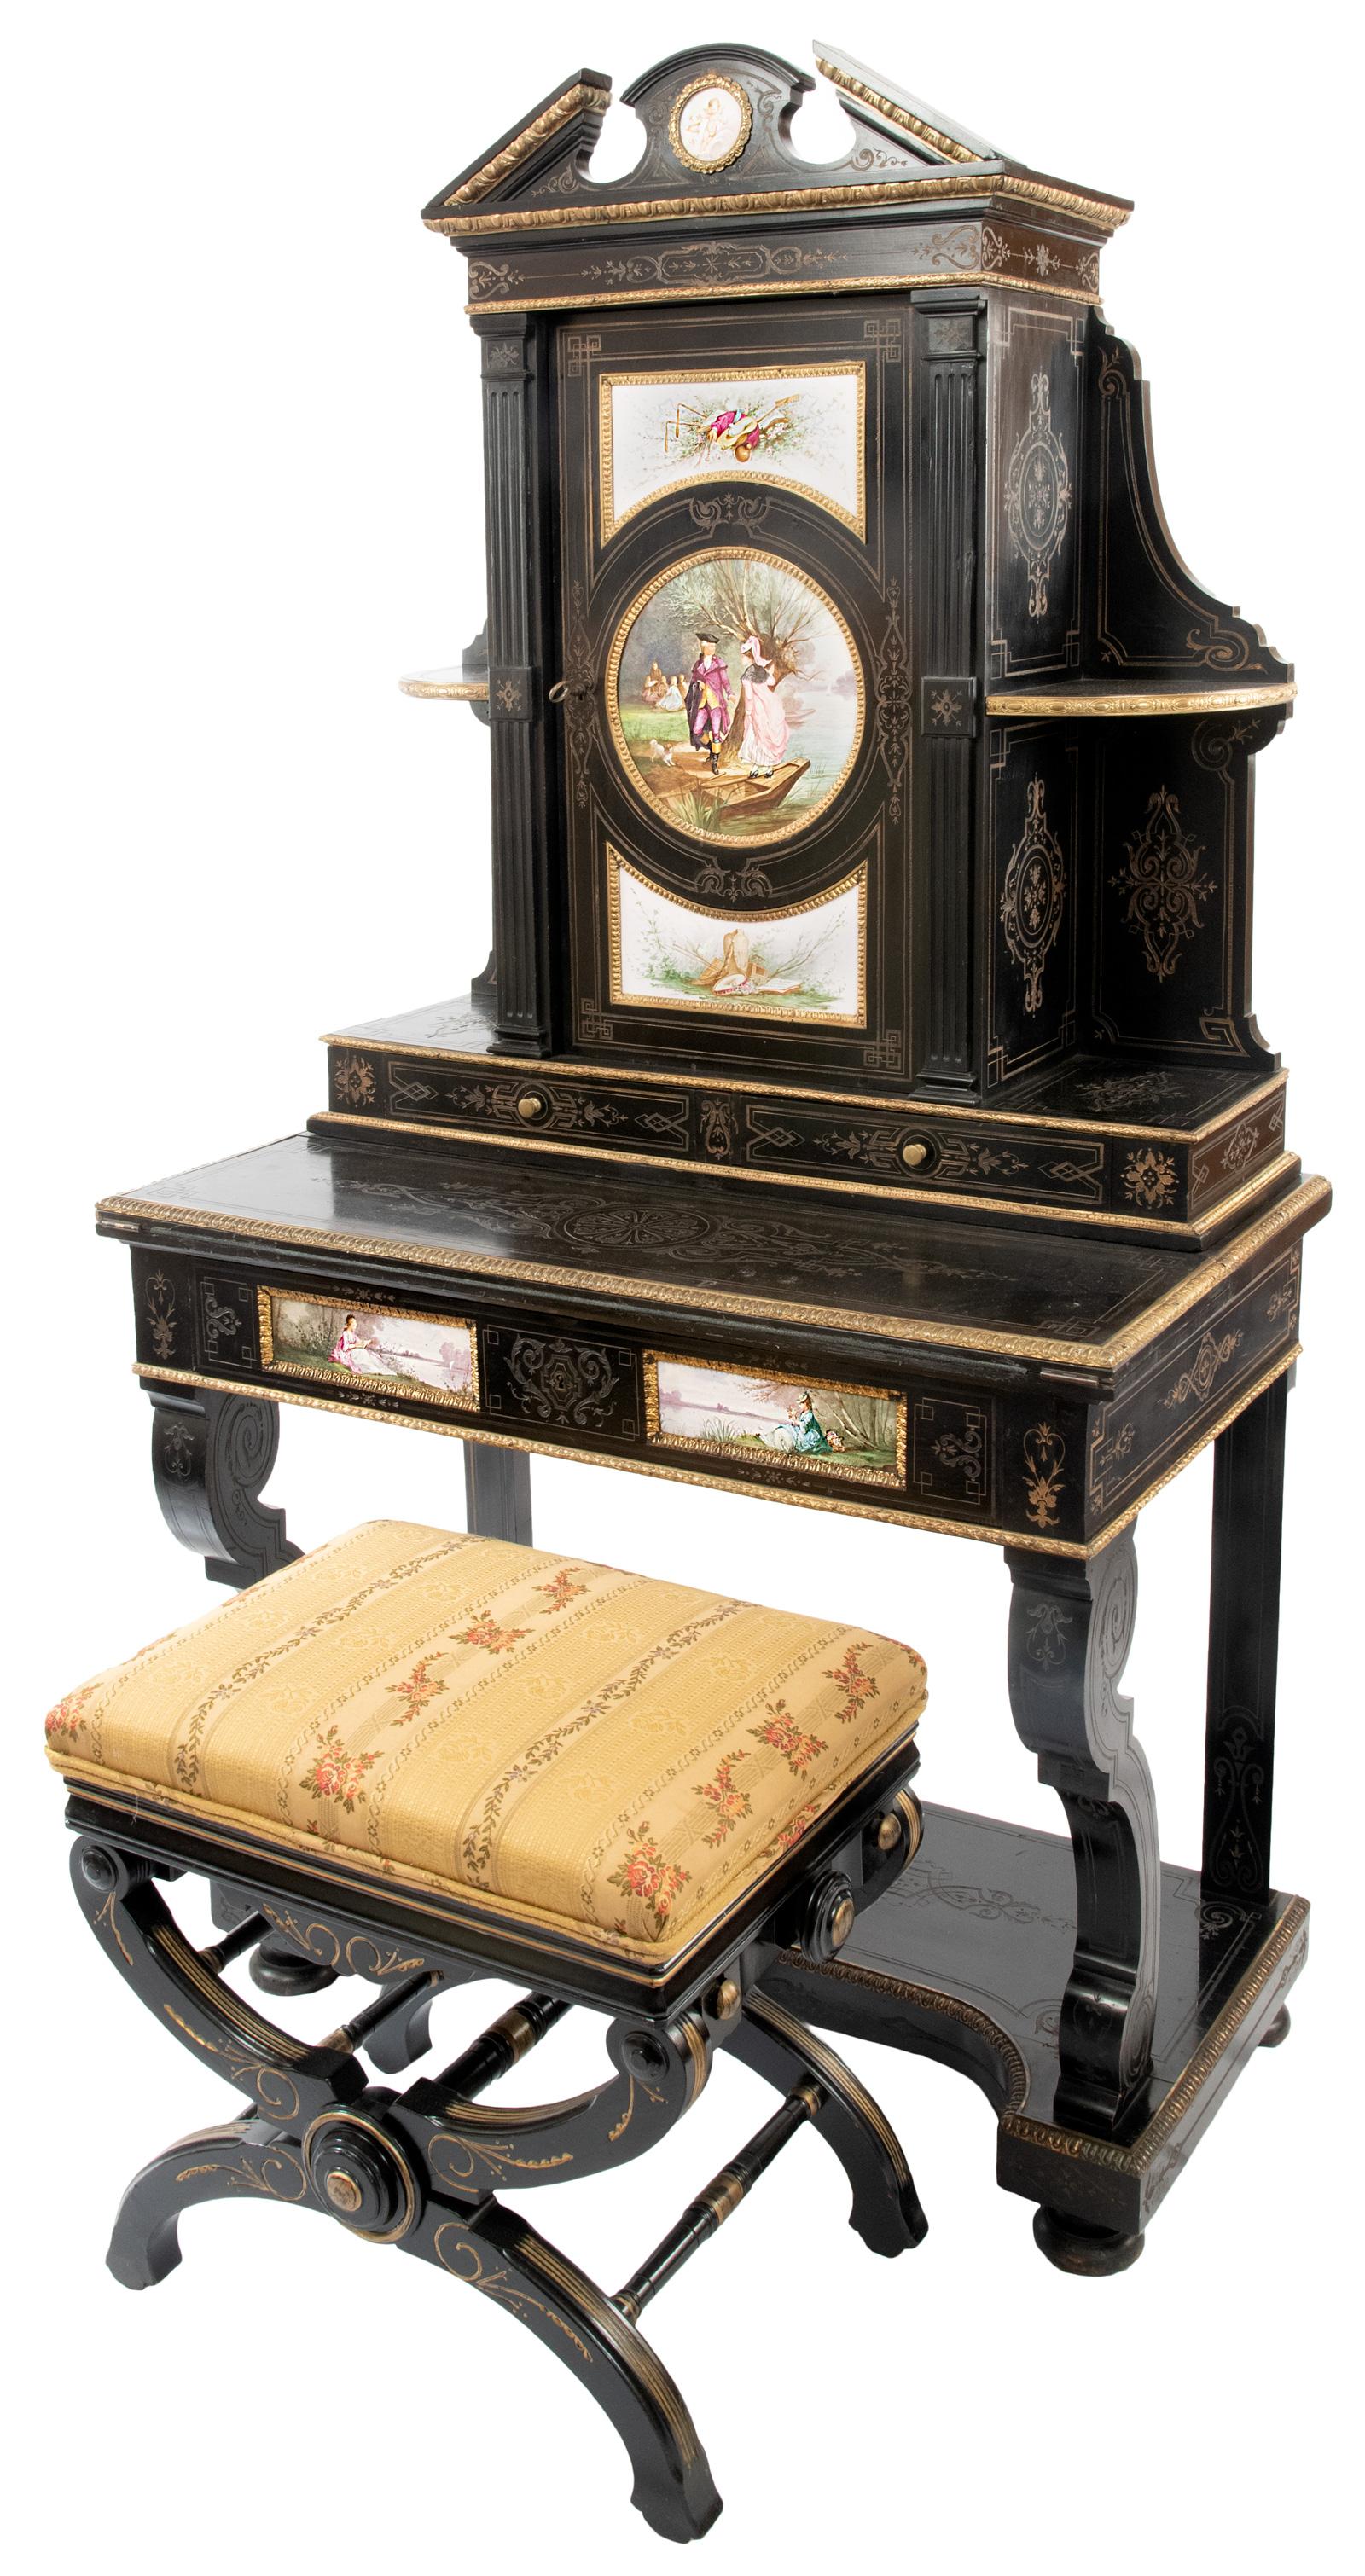 Napoleon III ormolu-mounted, incised, and ebonized desk with porcelain plaques. Accompanied by an Empire style parcel-gilt adjustable stool.